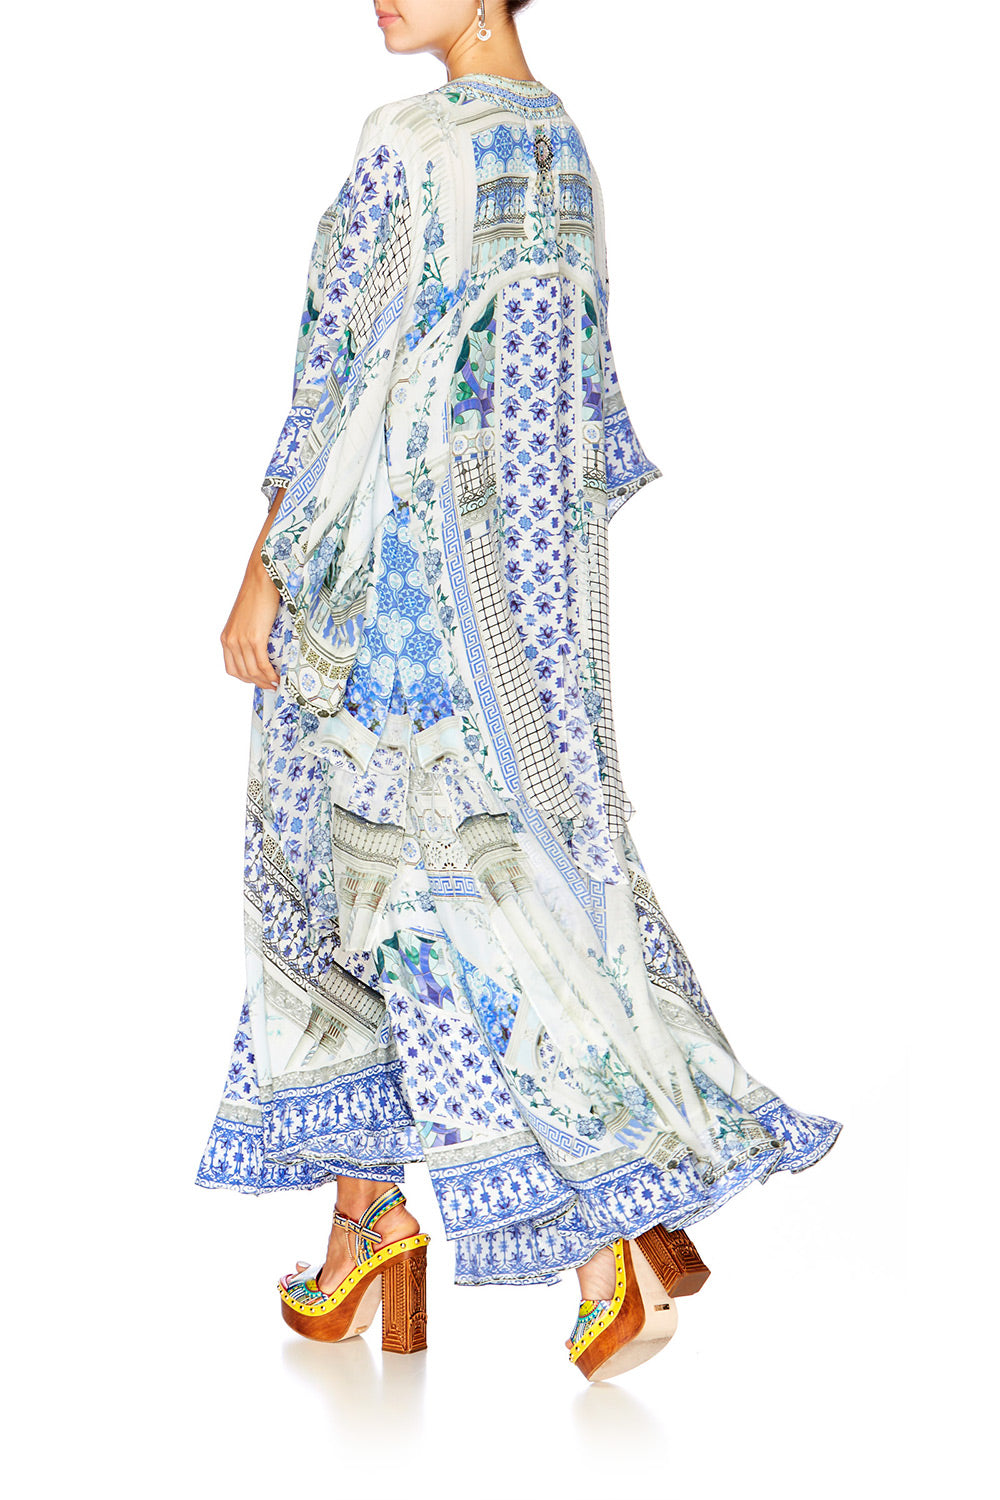 SALVADOR SUMMER LONG DRESS WITH TIE FRONT